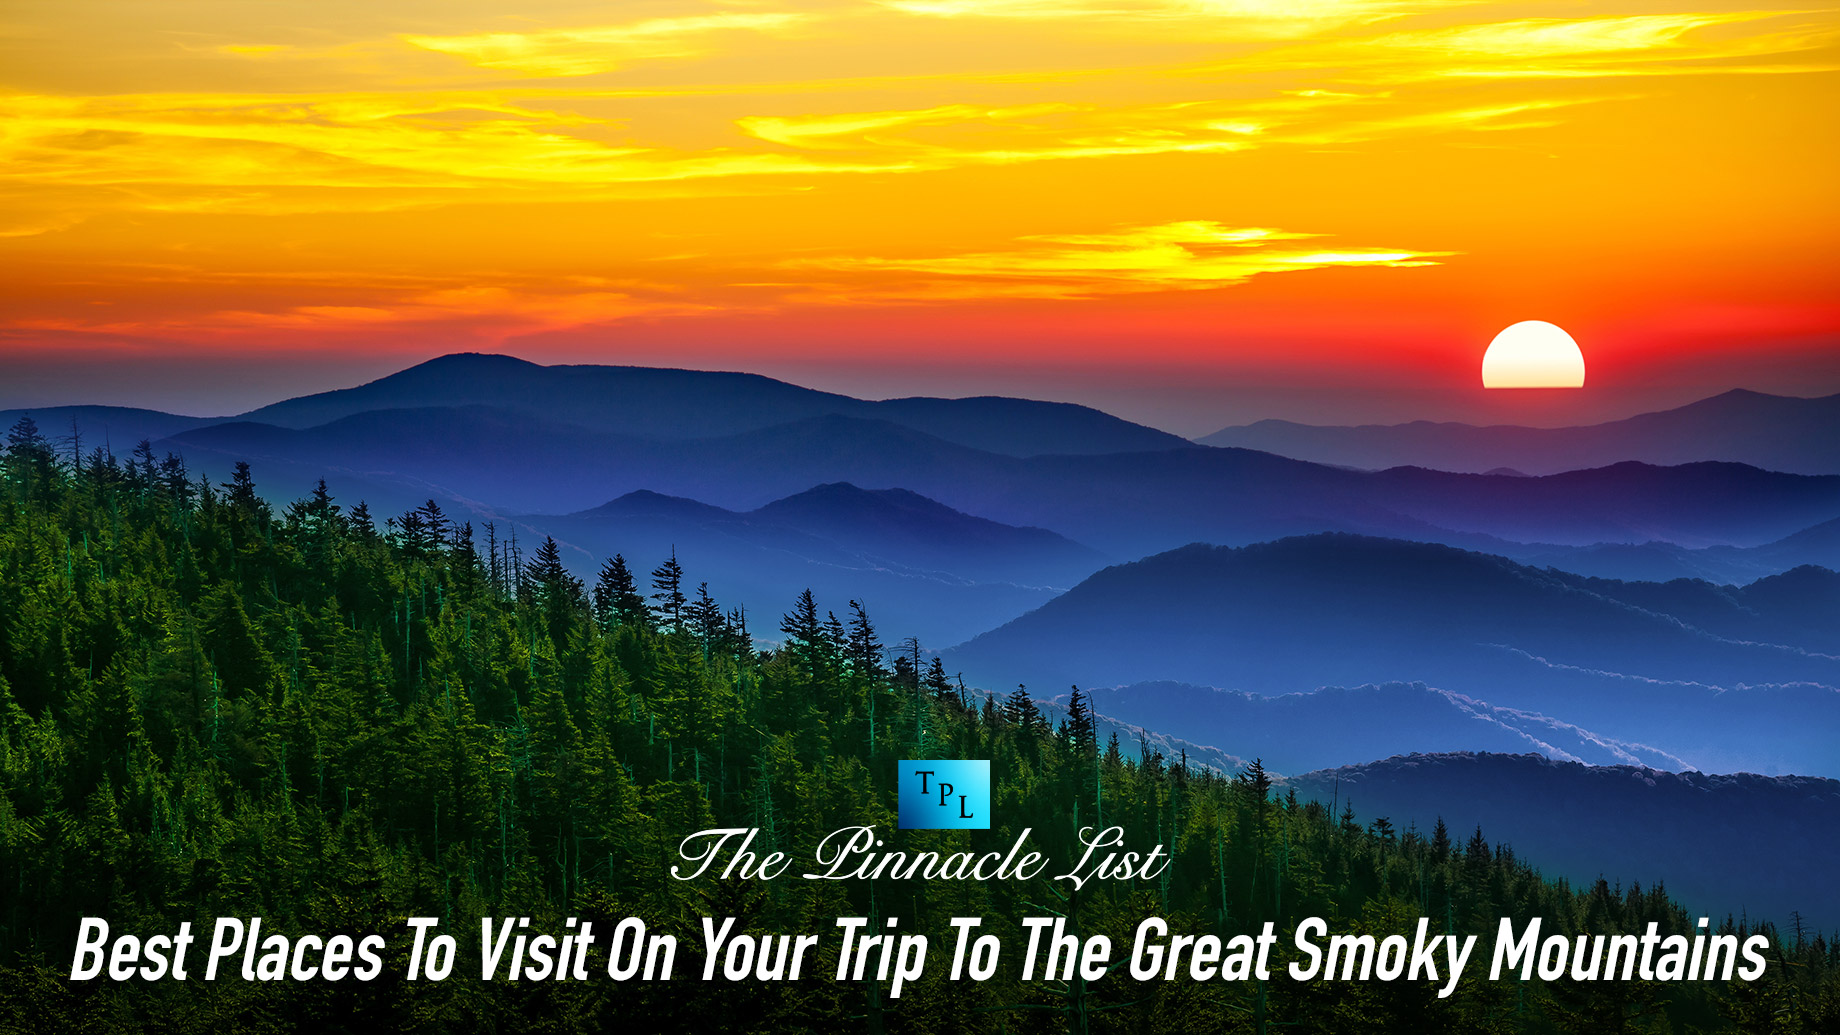 Best Places To Visit On Your Trip To The Great Smoky Mountains